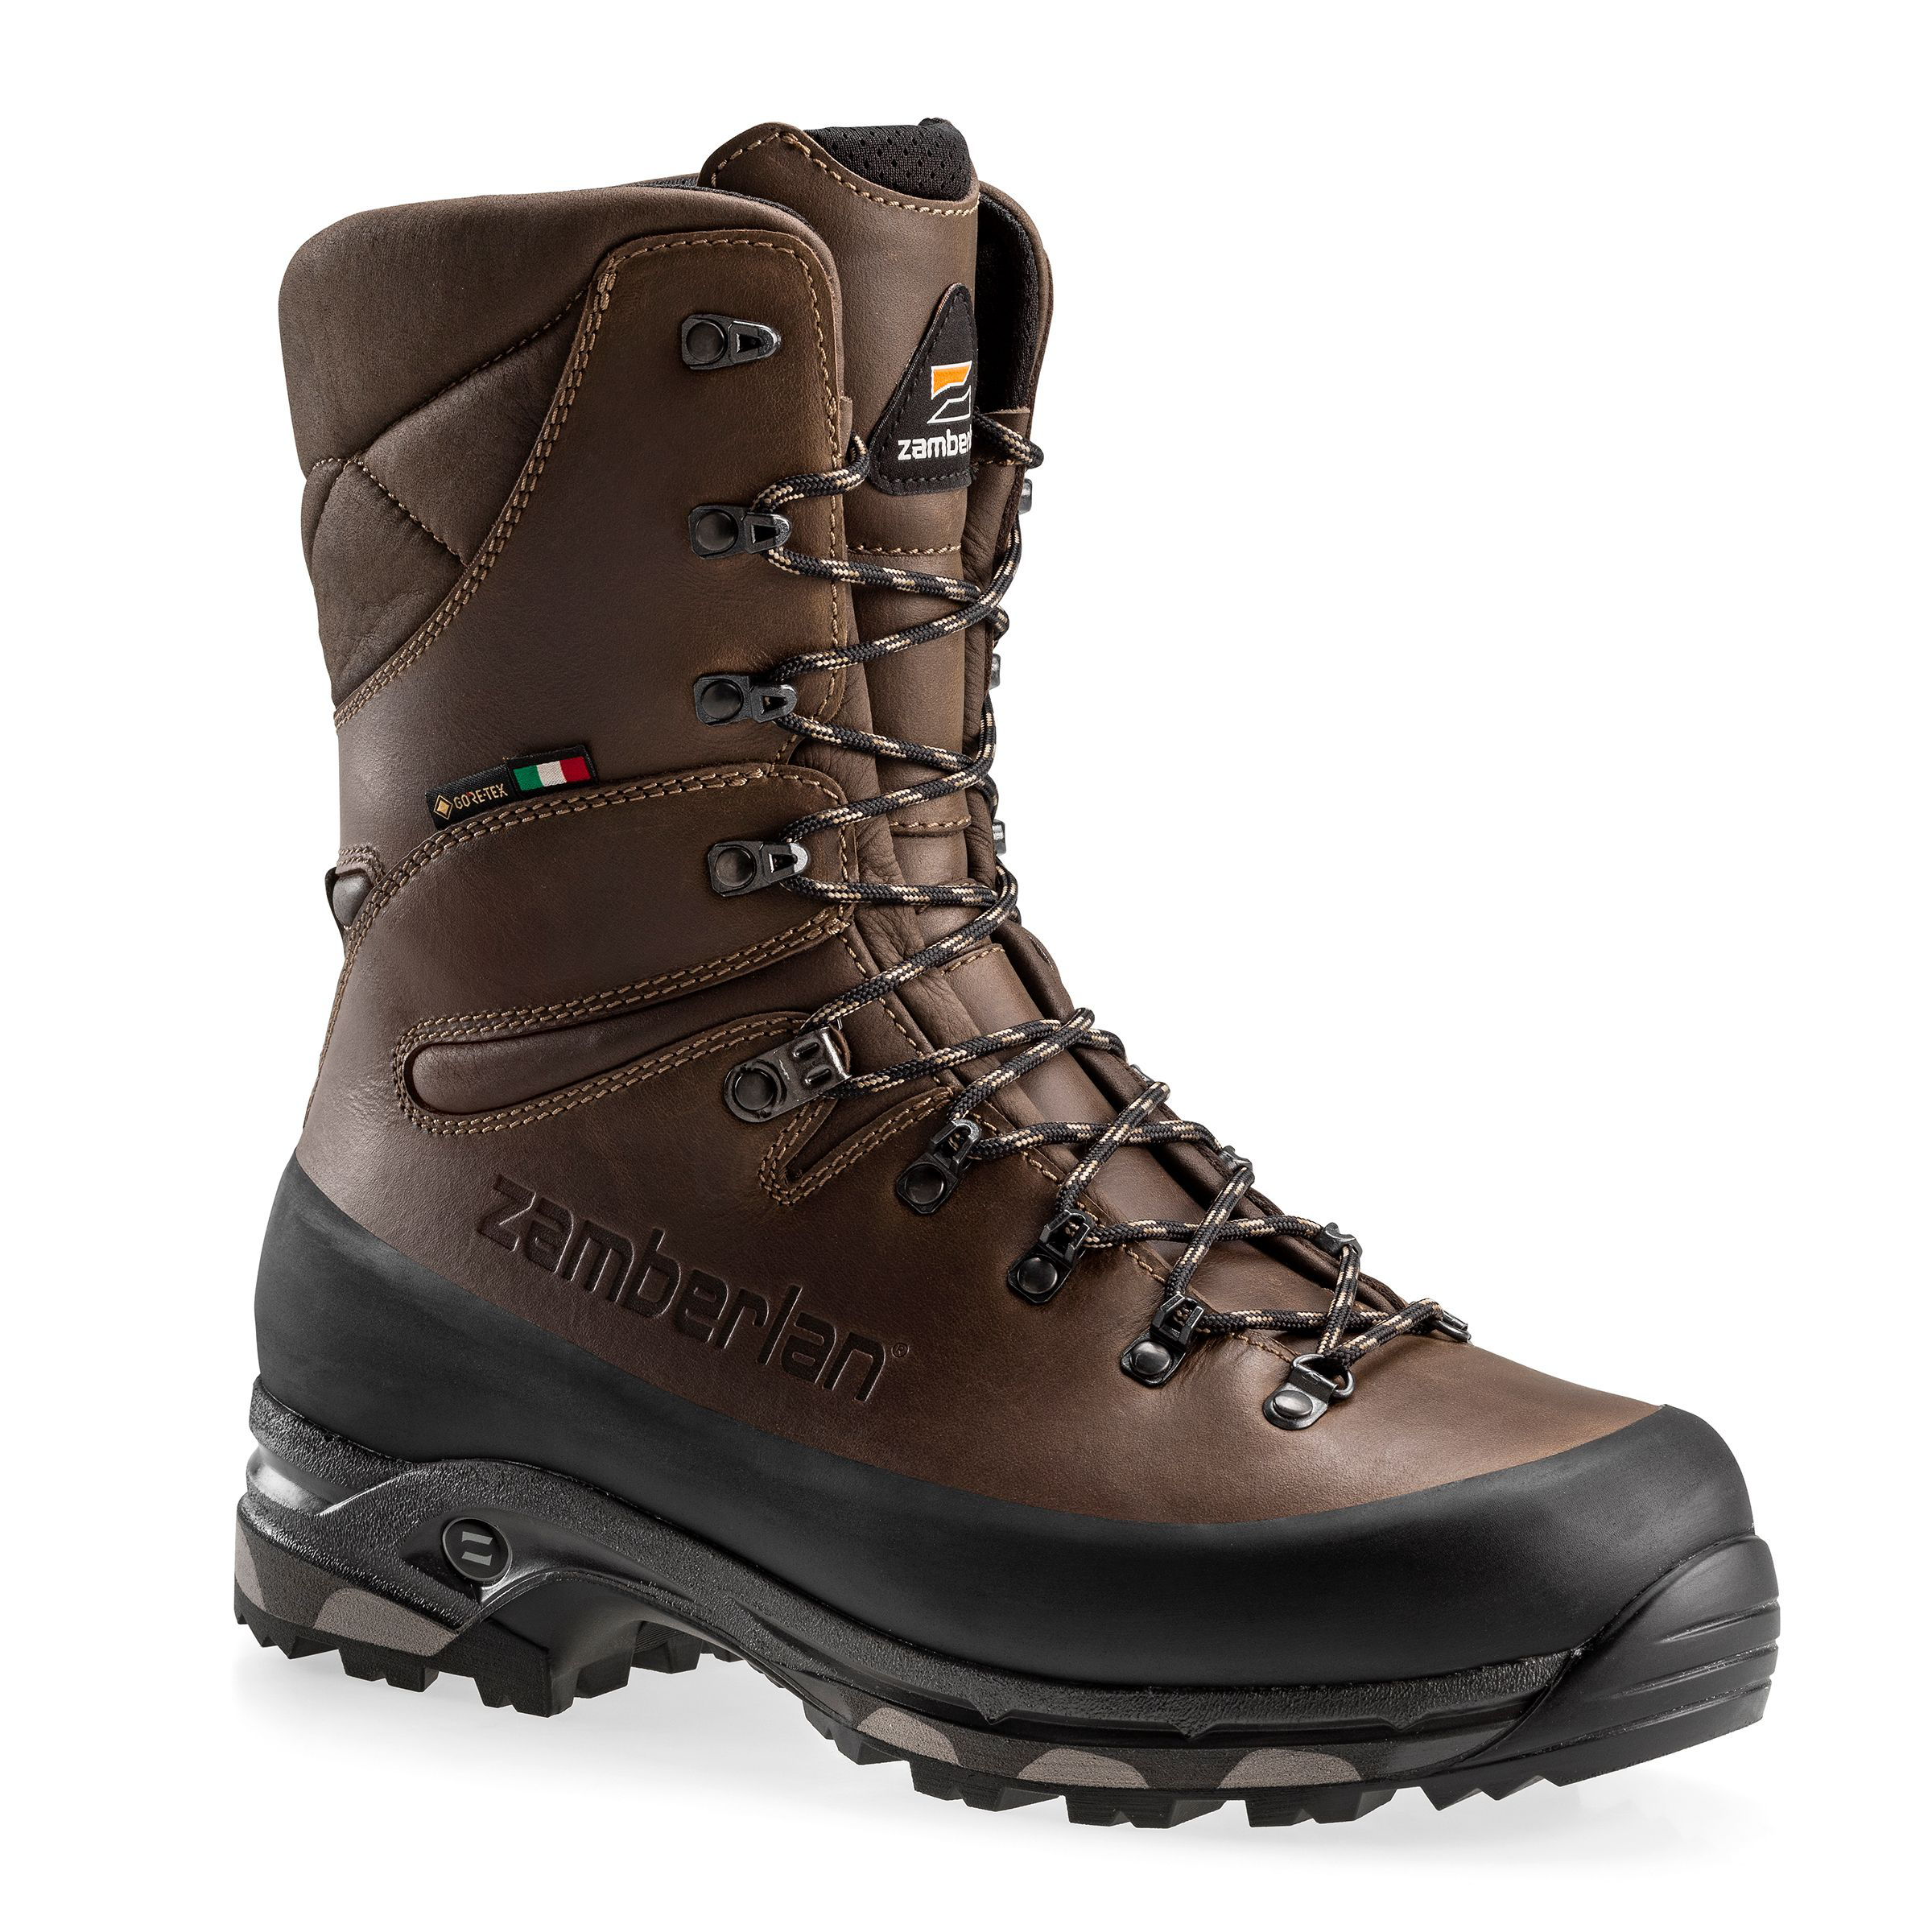 Zamberlan 1005 Hunter Pro GTX RR WL GORE-TEX Insulated Hunting Boots for Men - Brown - 11W